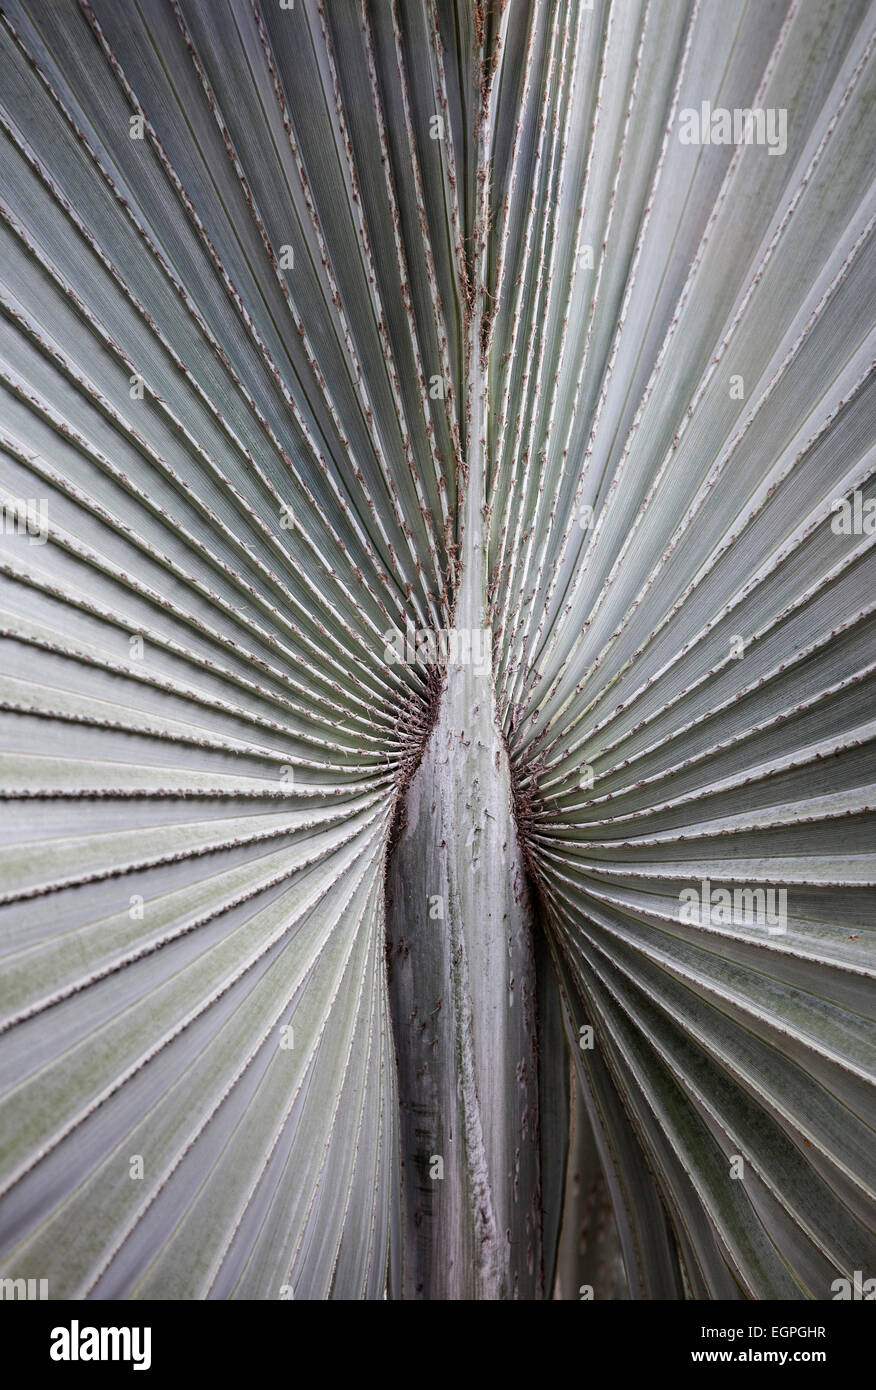 A silver grey Fan palm cultivar, Close view of the ribs radiating out from the centre, Shot in Vietnam. Stock Photo